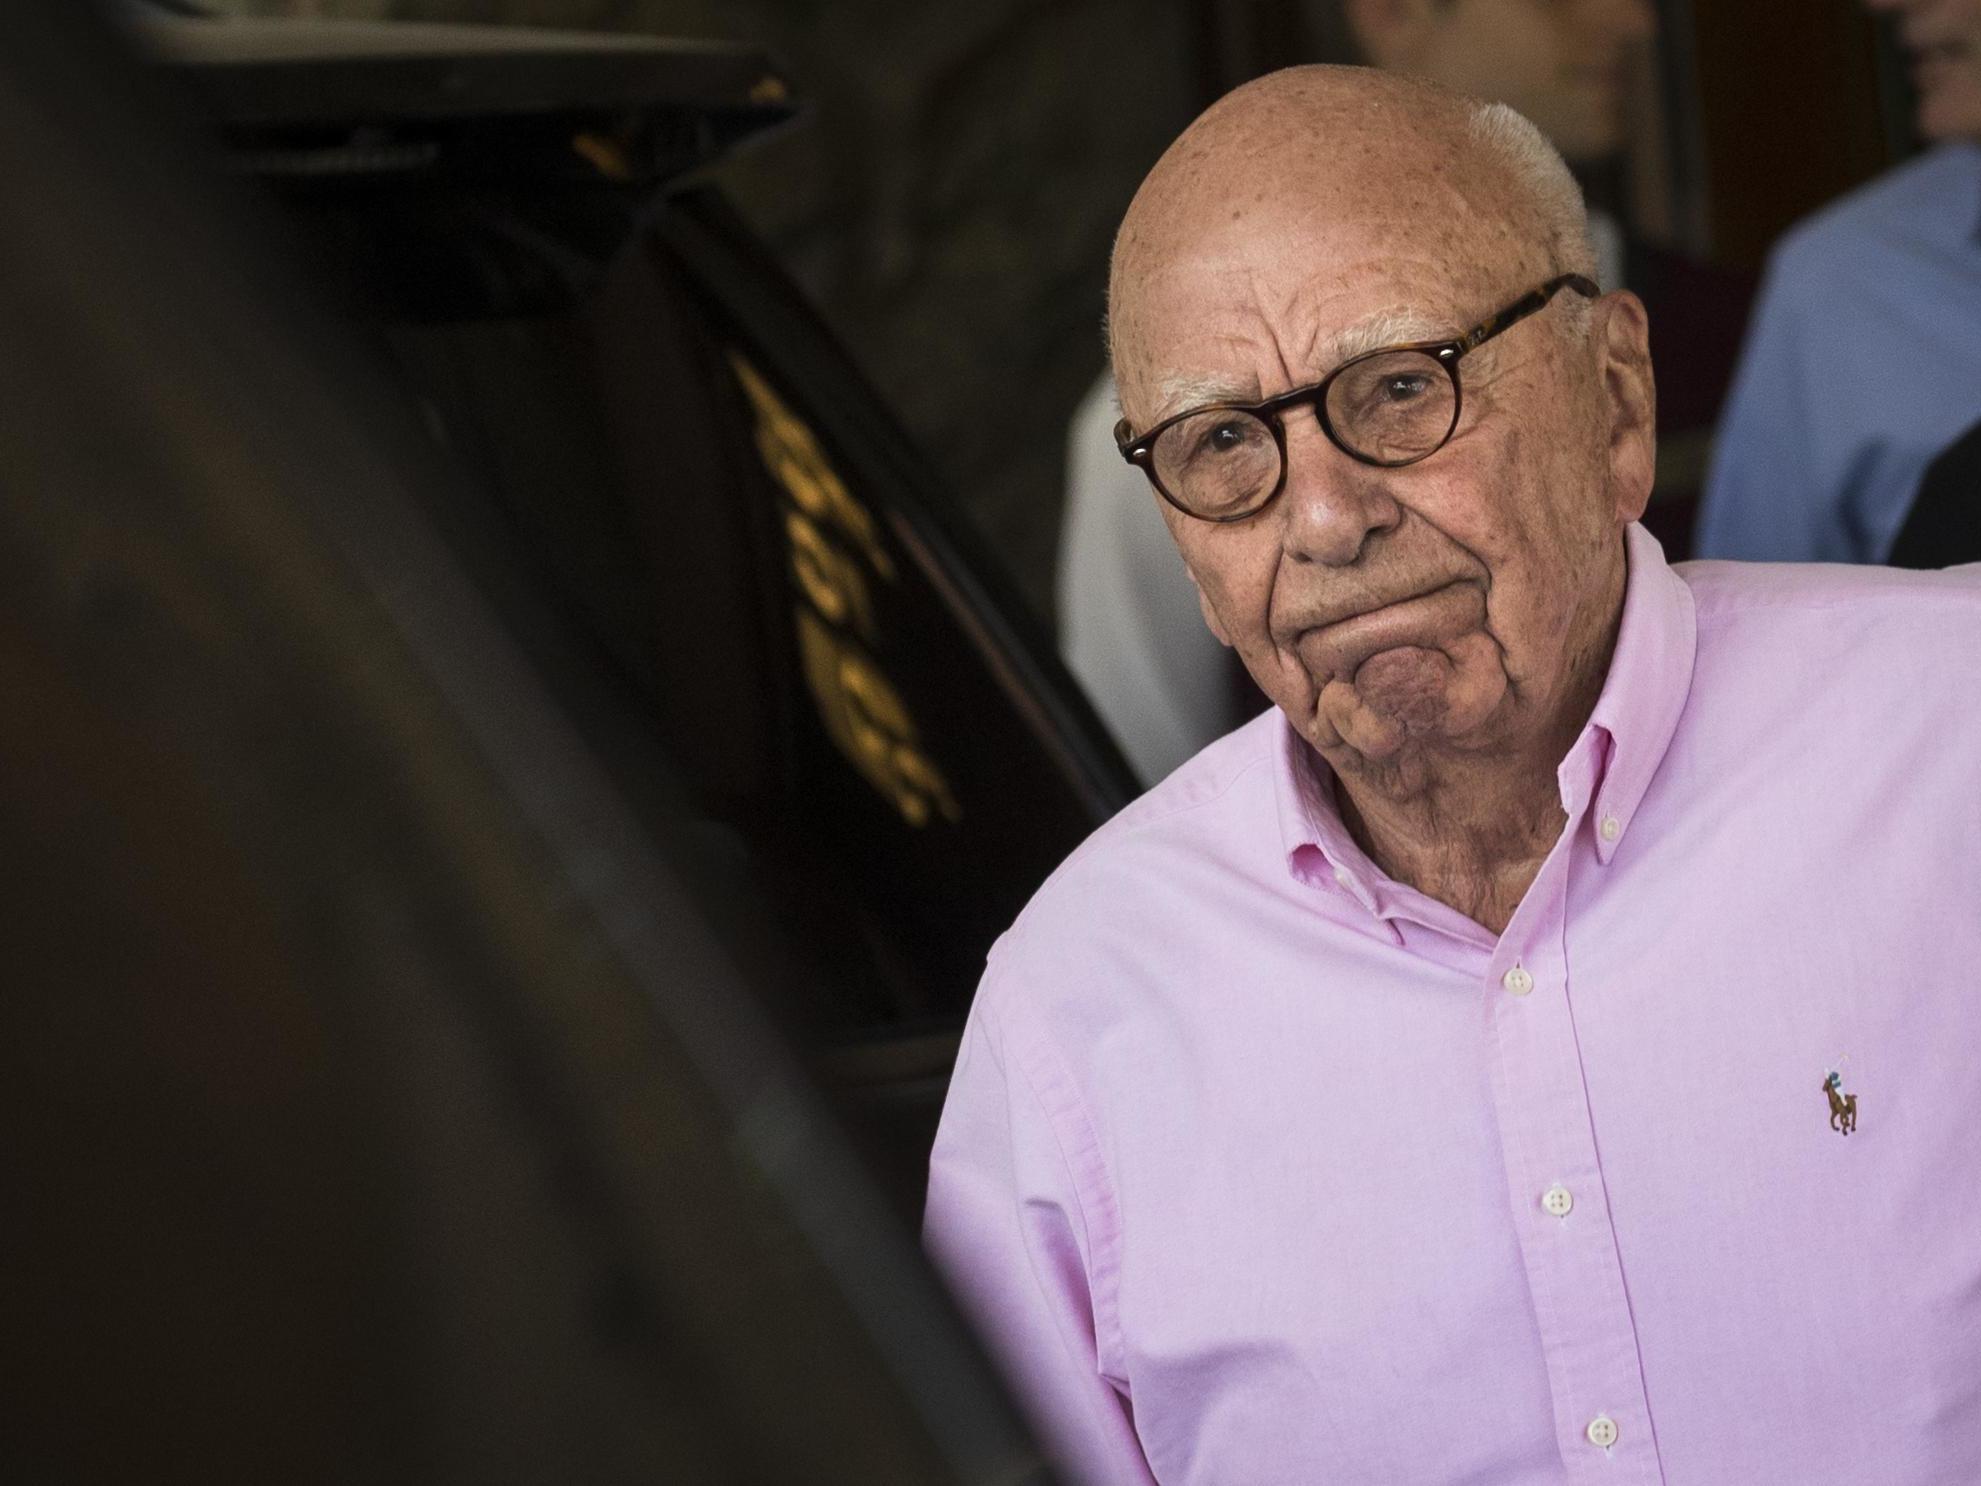 It’s difficult not to escape the conclusion that Rupert Murdoch has been pursuing a forlorn quest